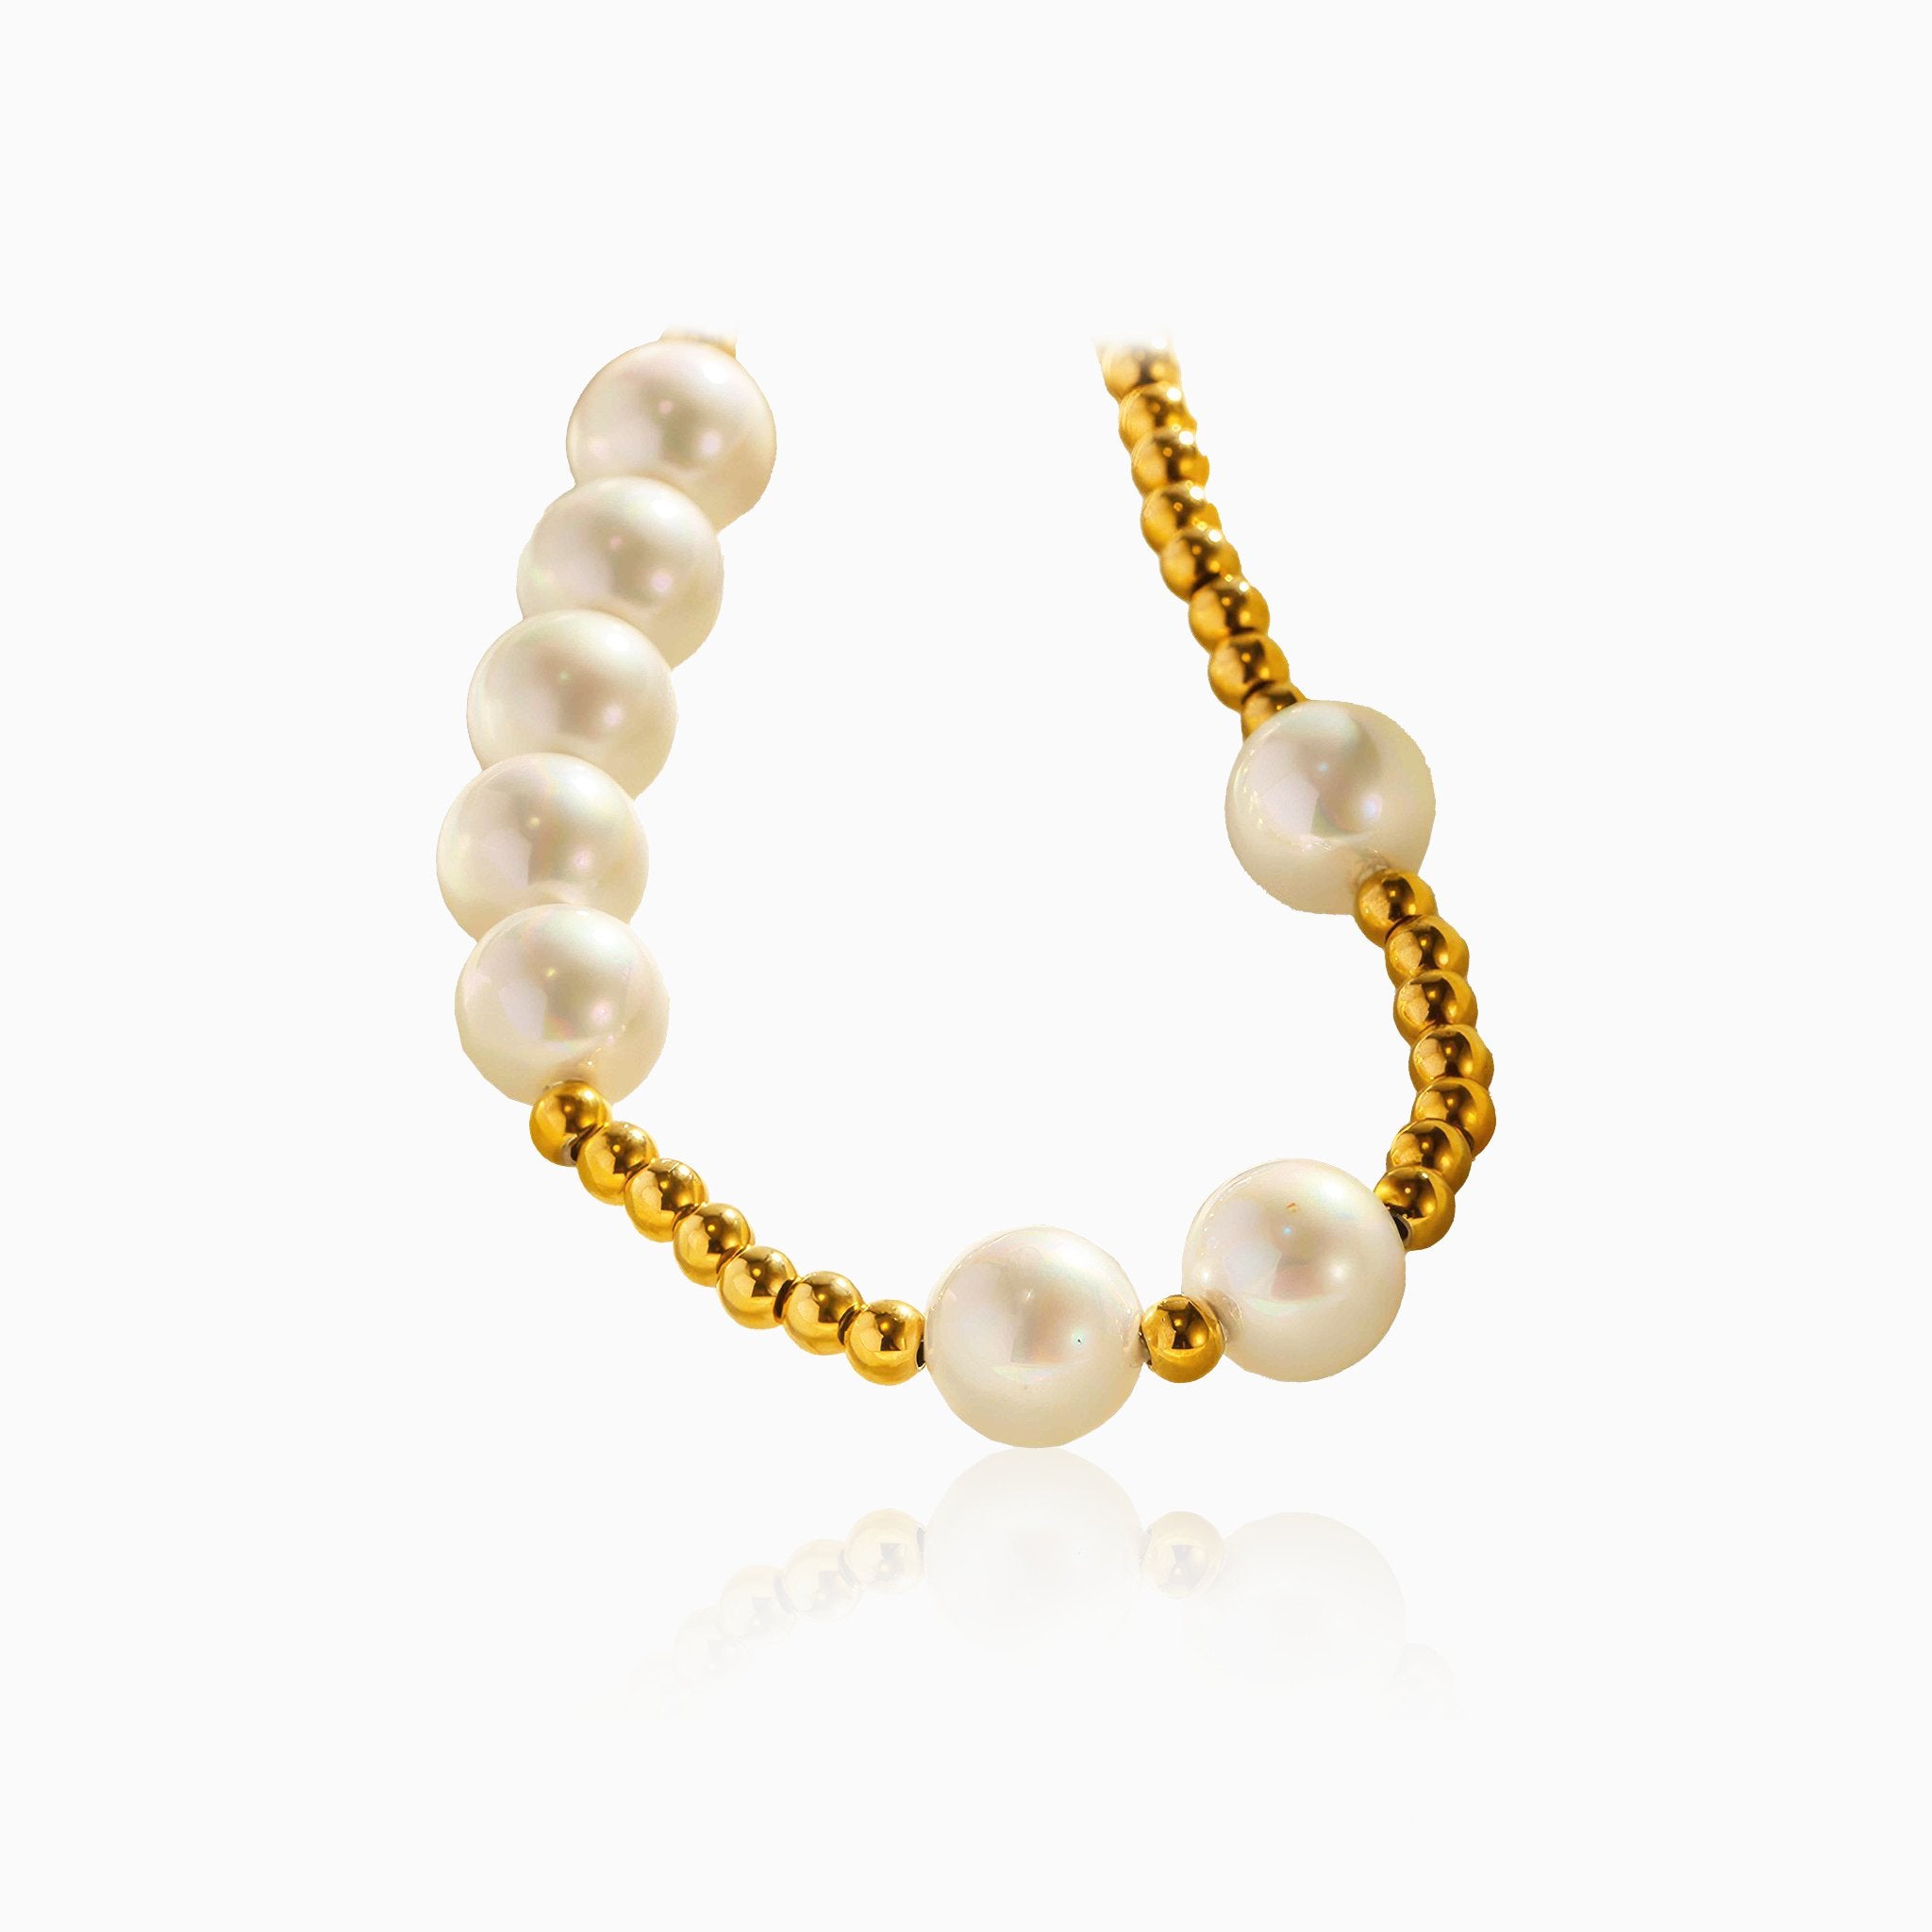 Dazzling Pearl Pendant Necklace - Nobbier - Necklace - 18K Gold And Titanium PVD Coated Jewelry